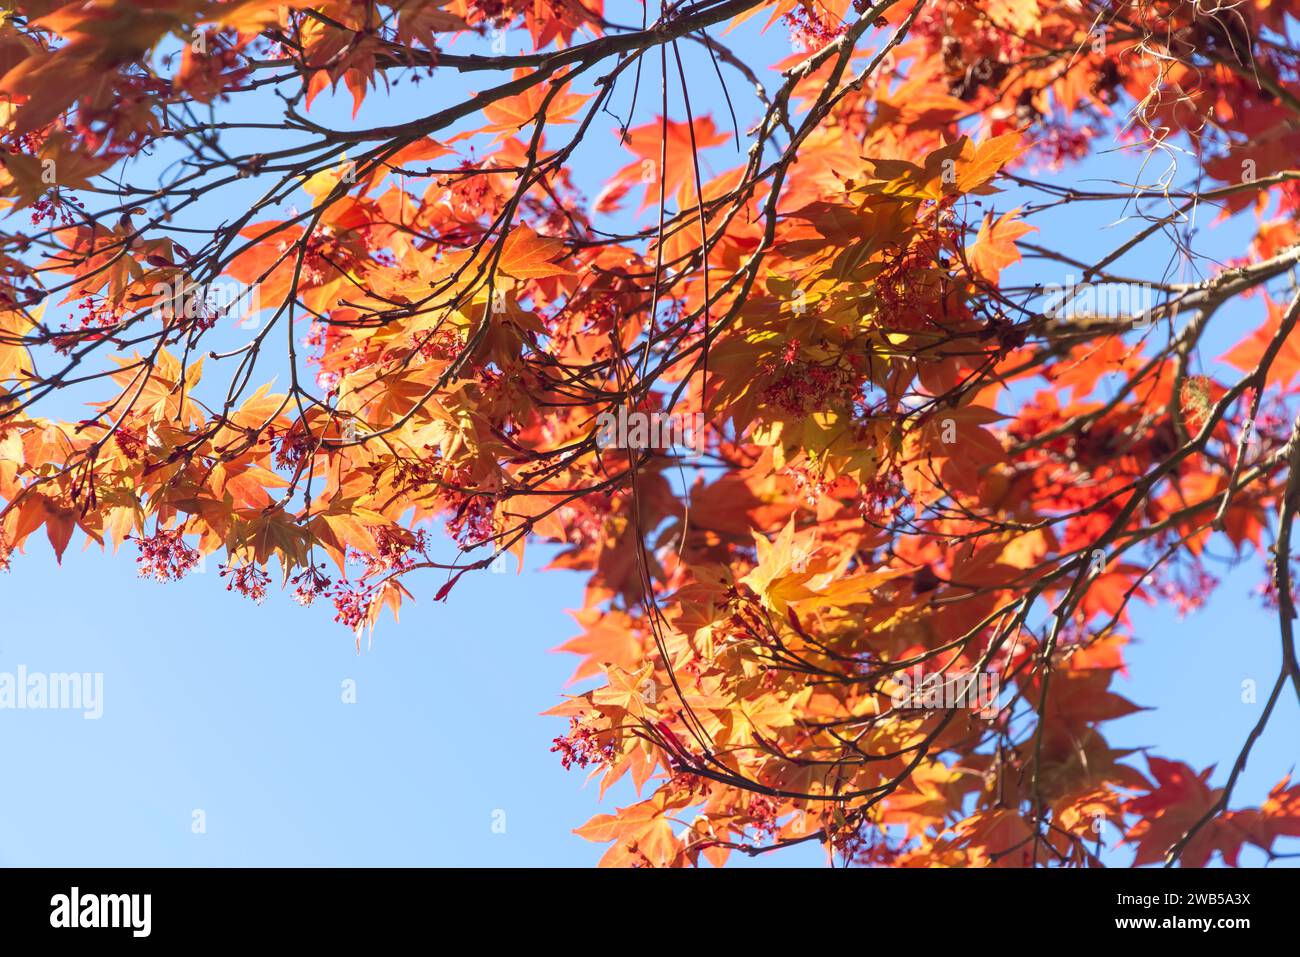 Vibrant colors of Autumn, red, orange, yellow leaves on a tree with a blue sky in background. Stock Photo